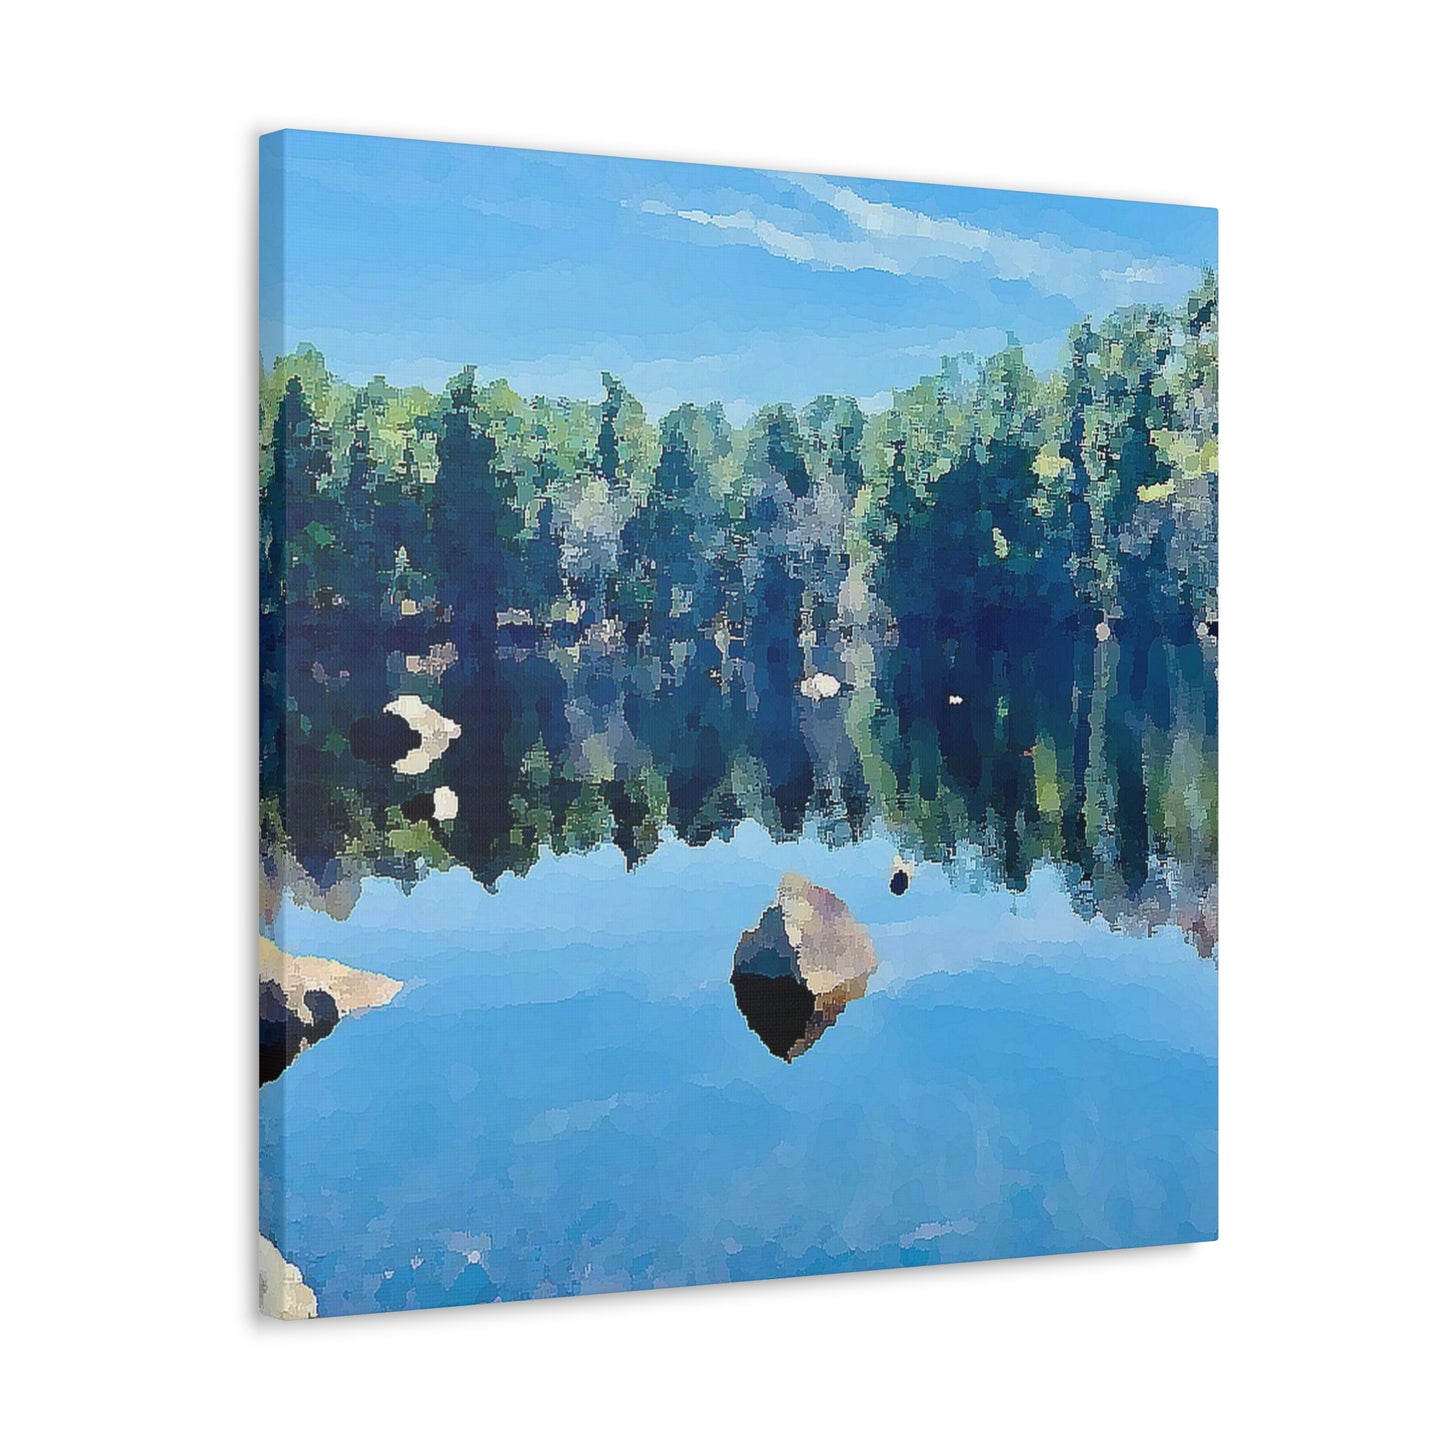 Canvas Gallery Wraps - Misty Lake Mistery